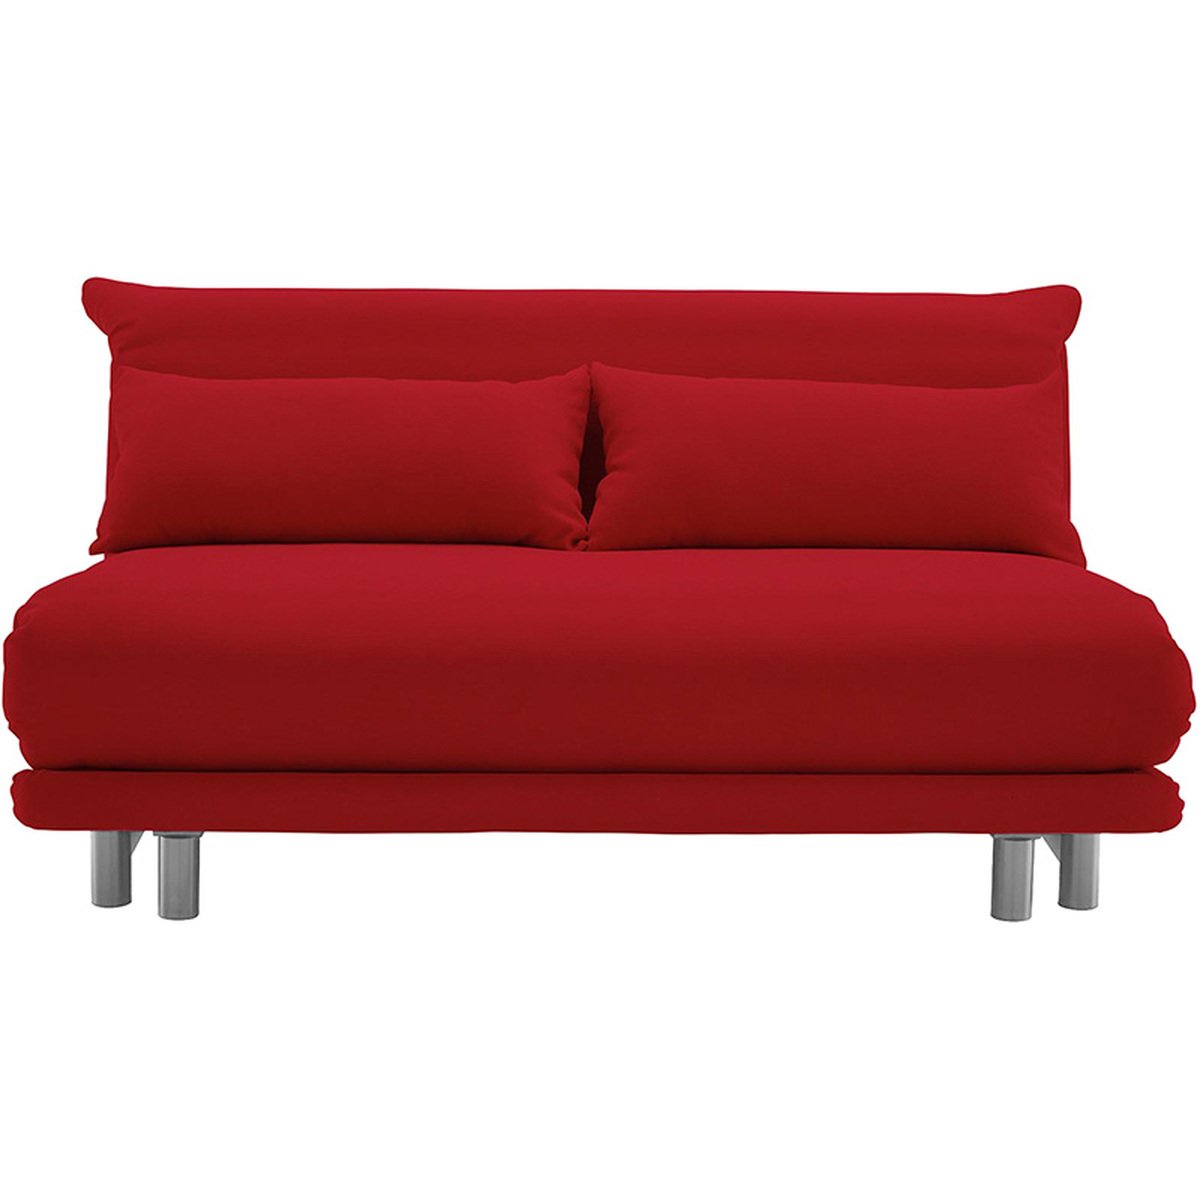 Ligne Roset Multy Sofa Bed Without